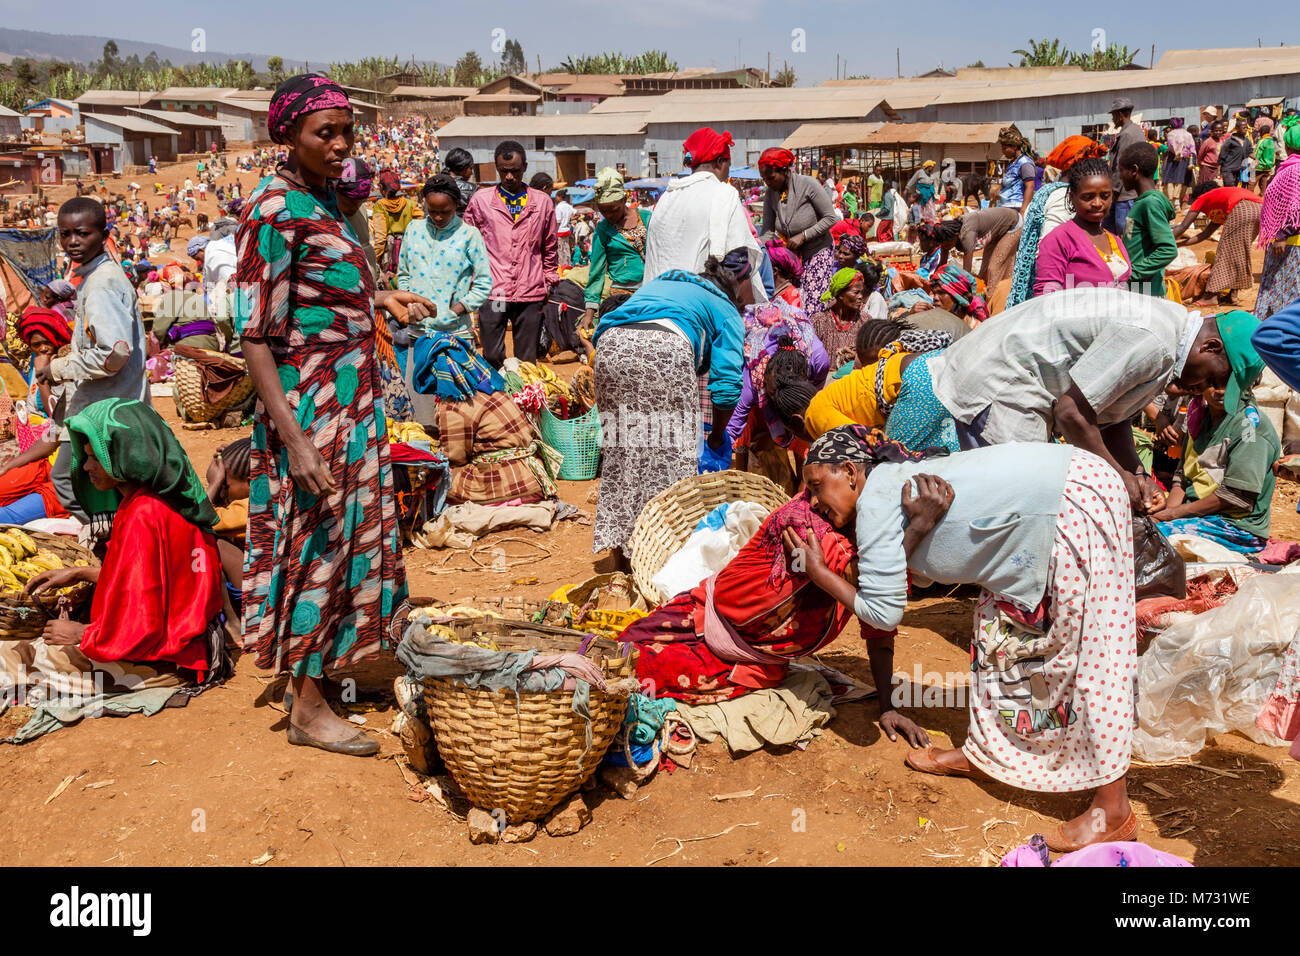 Local Women Greeting Each Other At The Famous Saturday Market In The Dorze Village Of Chencha, High Up In The Guge Mountains, Gamo Gofa Zone, Ethiopia Stock Photo